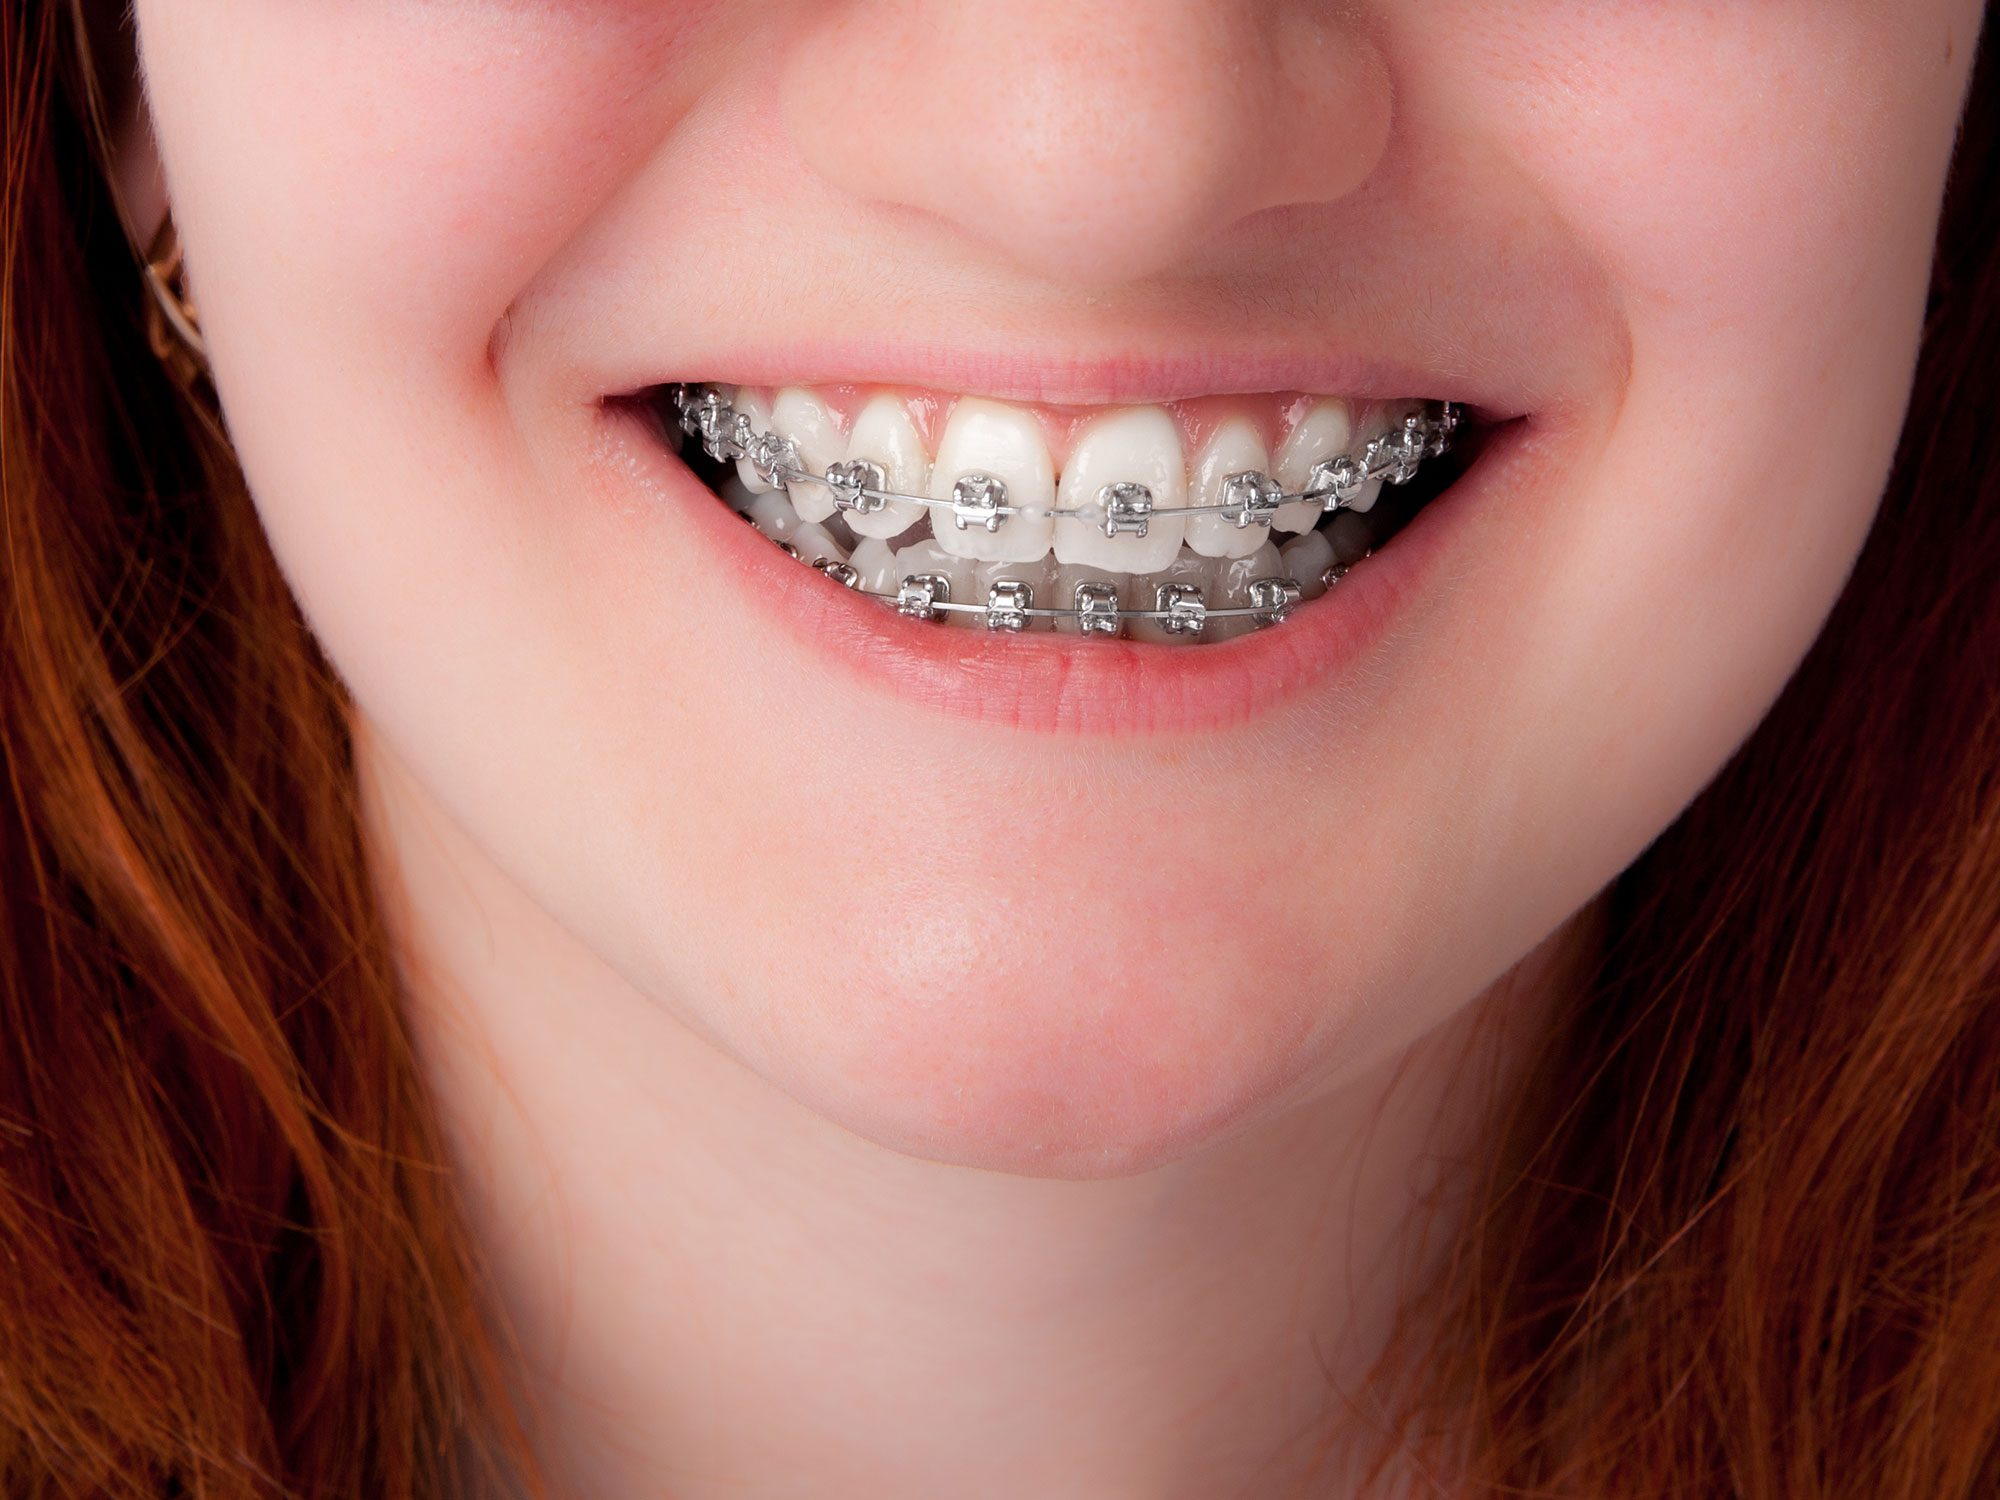 5 Signs You Need Dental Braces Again